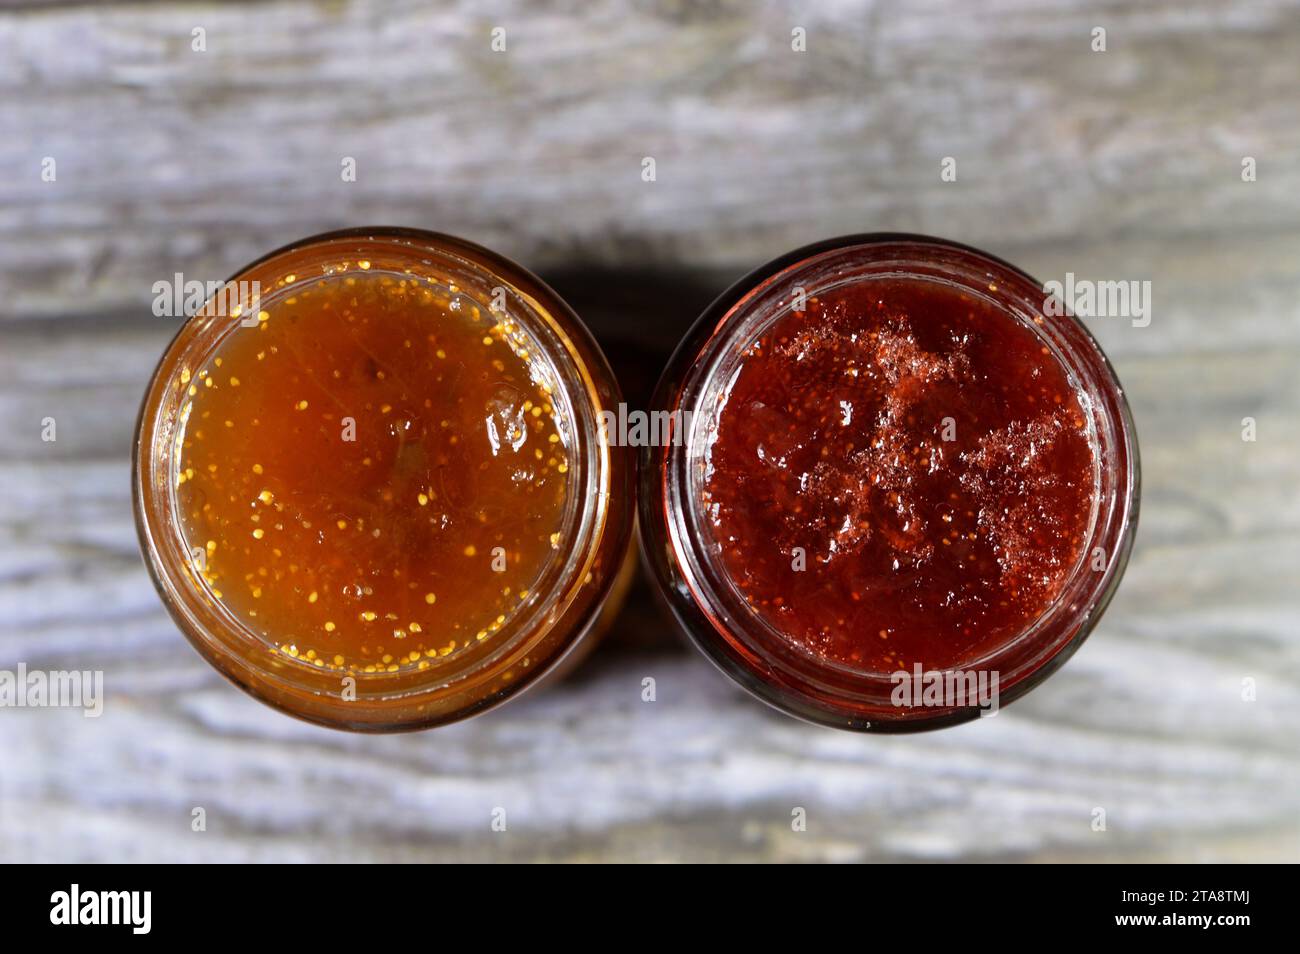 Fig fruit and strawberry jam bottles, preparations of fruits whose main preserving agent is sugar and sometimes acid, often stored in glass jars and u Stock Photo